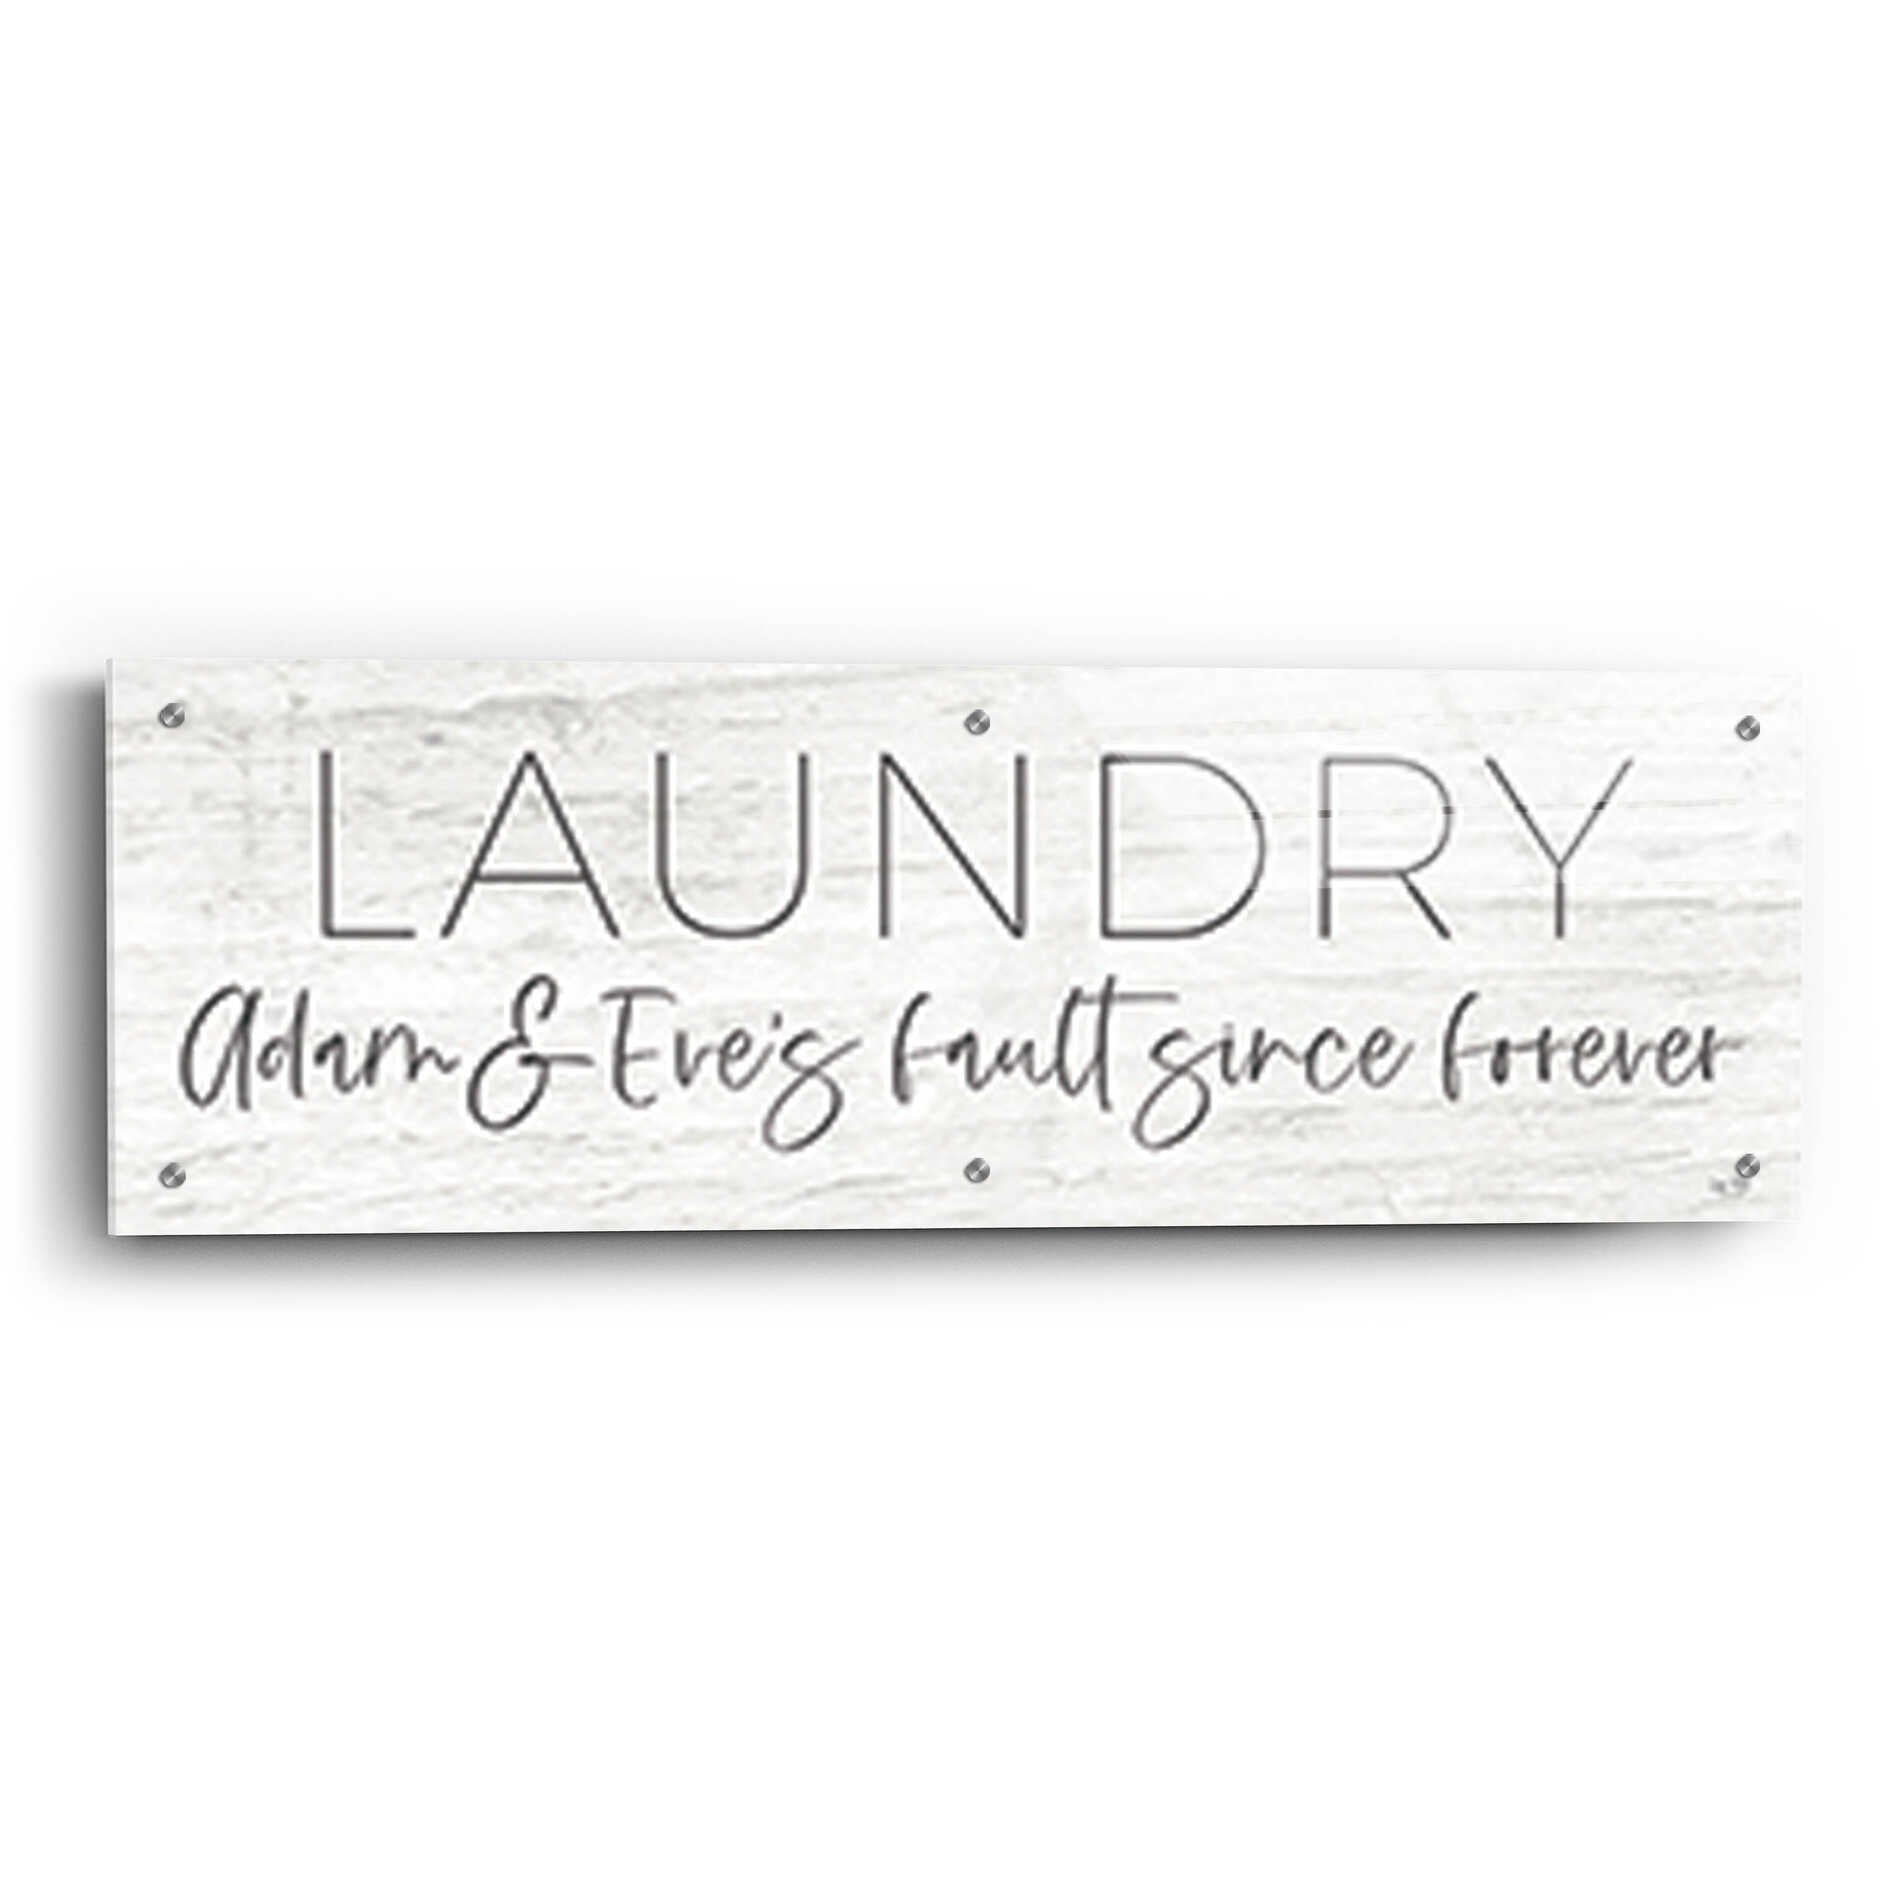 Epic Art 'Laundry - Adam and Eve's Fault Since Forever' by Lux + Me Designs , Acrylic Glass Wall Art,36x12